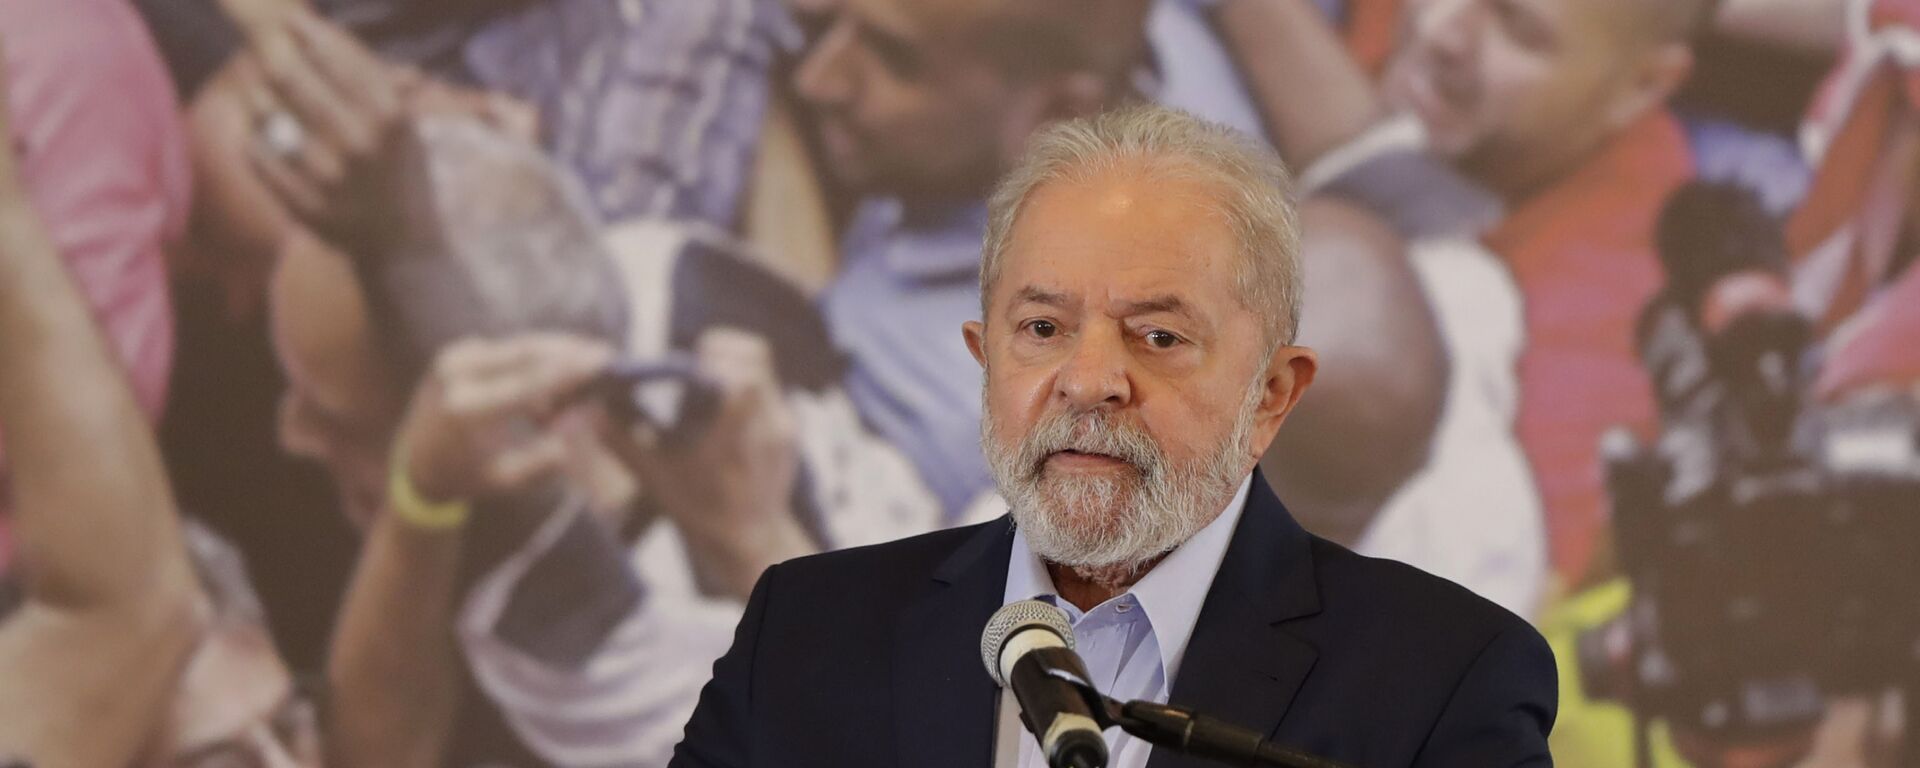 In this March 10, 2021, file photo, former Brazilian President Luiz Inacio Lula da Silva speaks at the Metalworkers Union headquarters in Sao Bernardo do Campo, Sao Paulo state, Brazil, after a judge threw out both of his corruption convictions. - Sputnik International, 1920, 15.04.2021